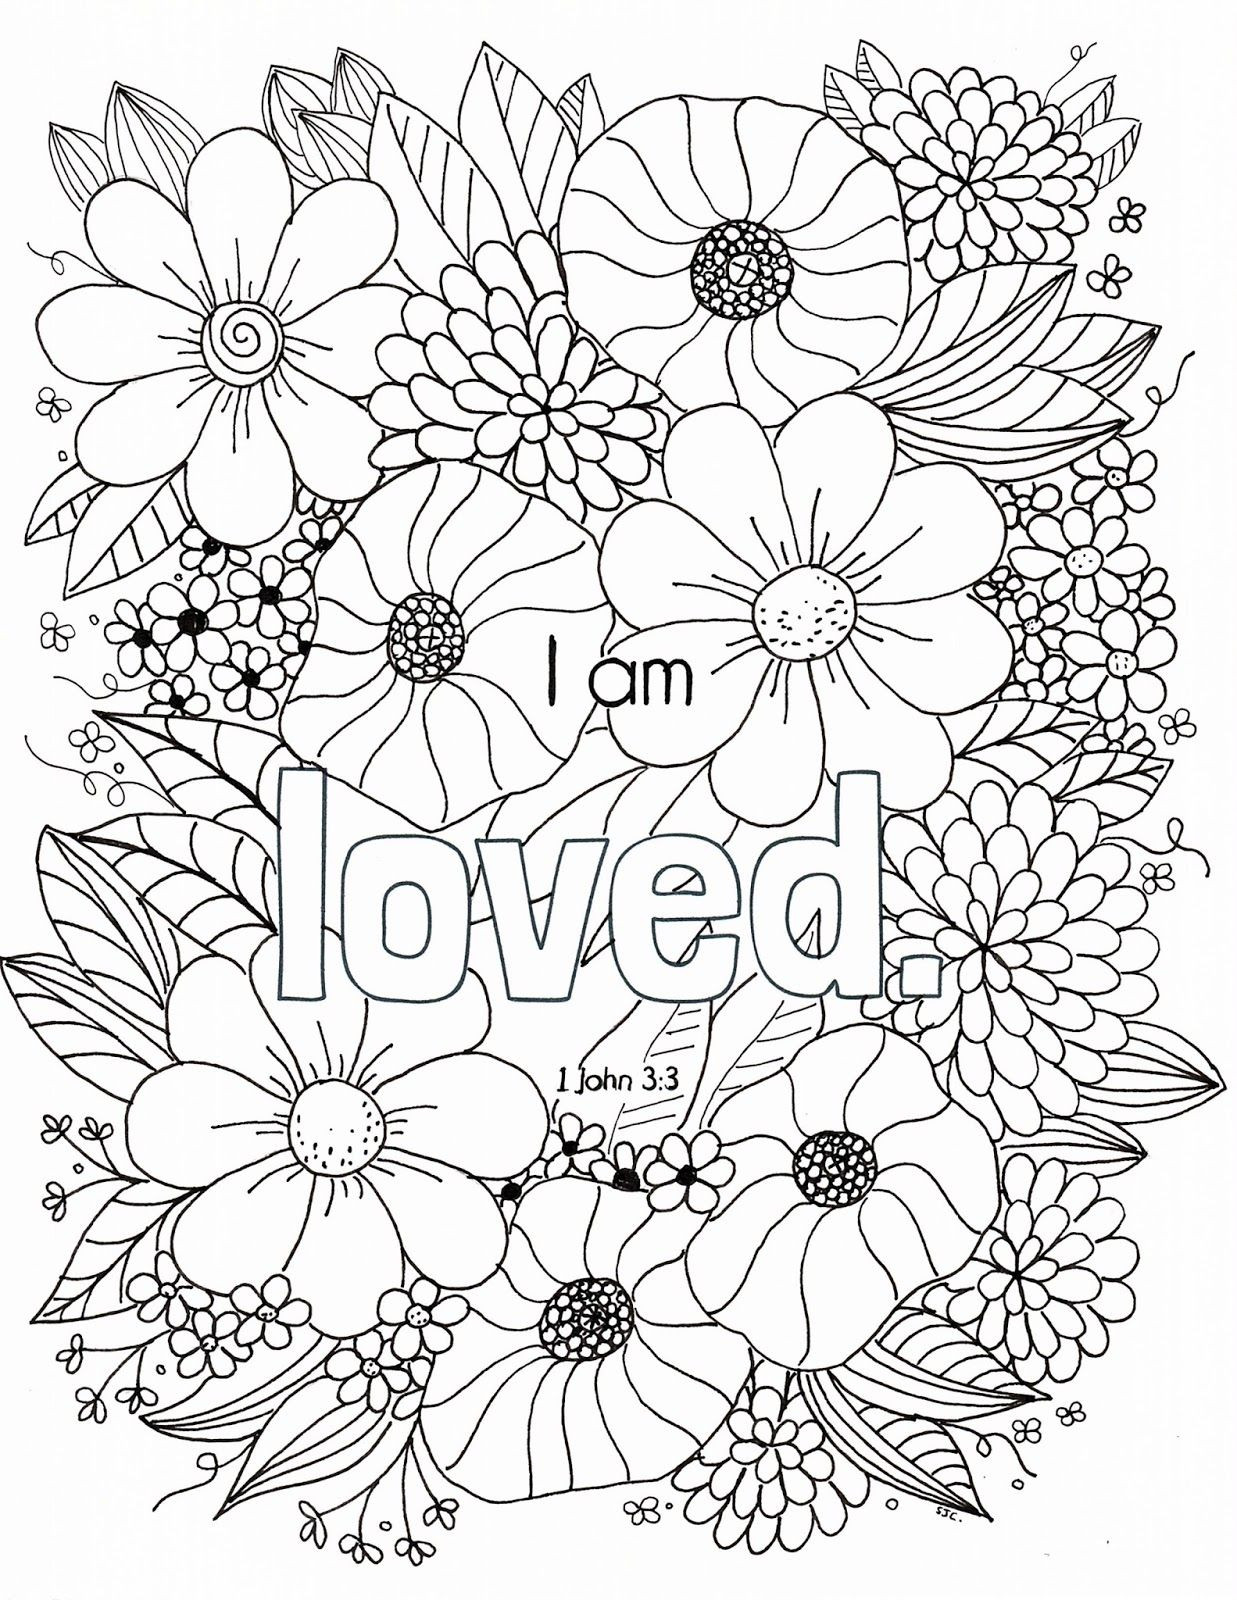 Bible Coloring Book For Adults
 Wel e to the “Who I am In Christ” Coloring Page Series